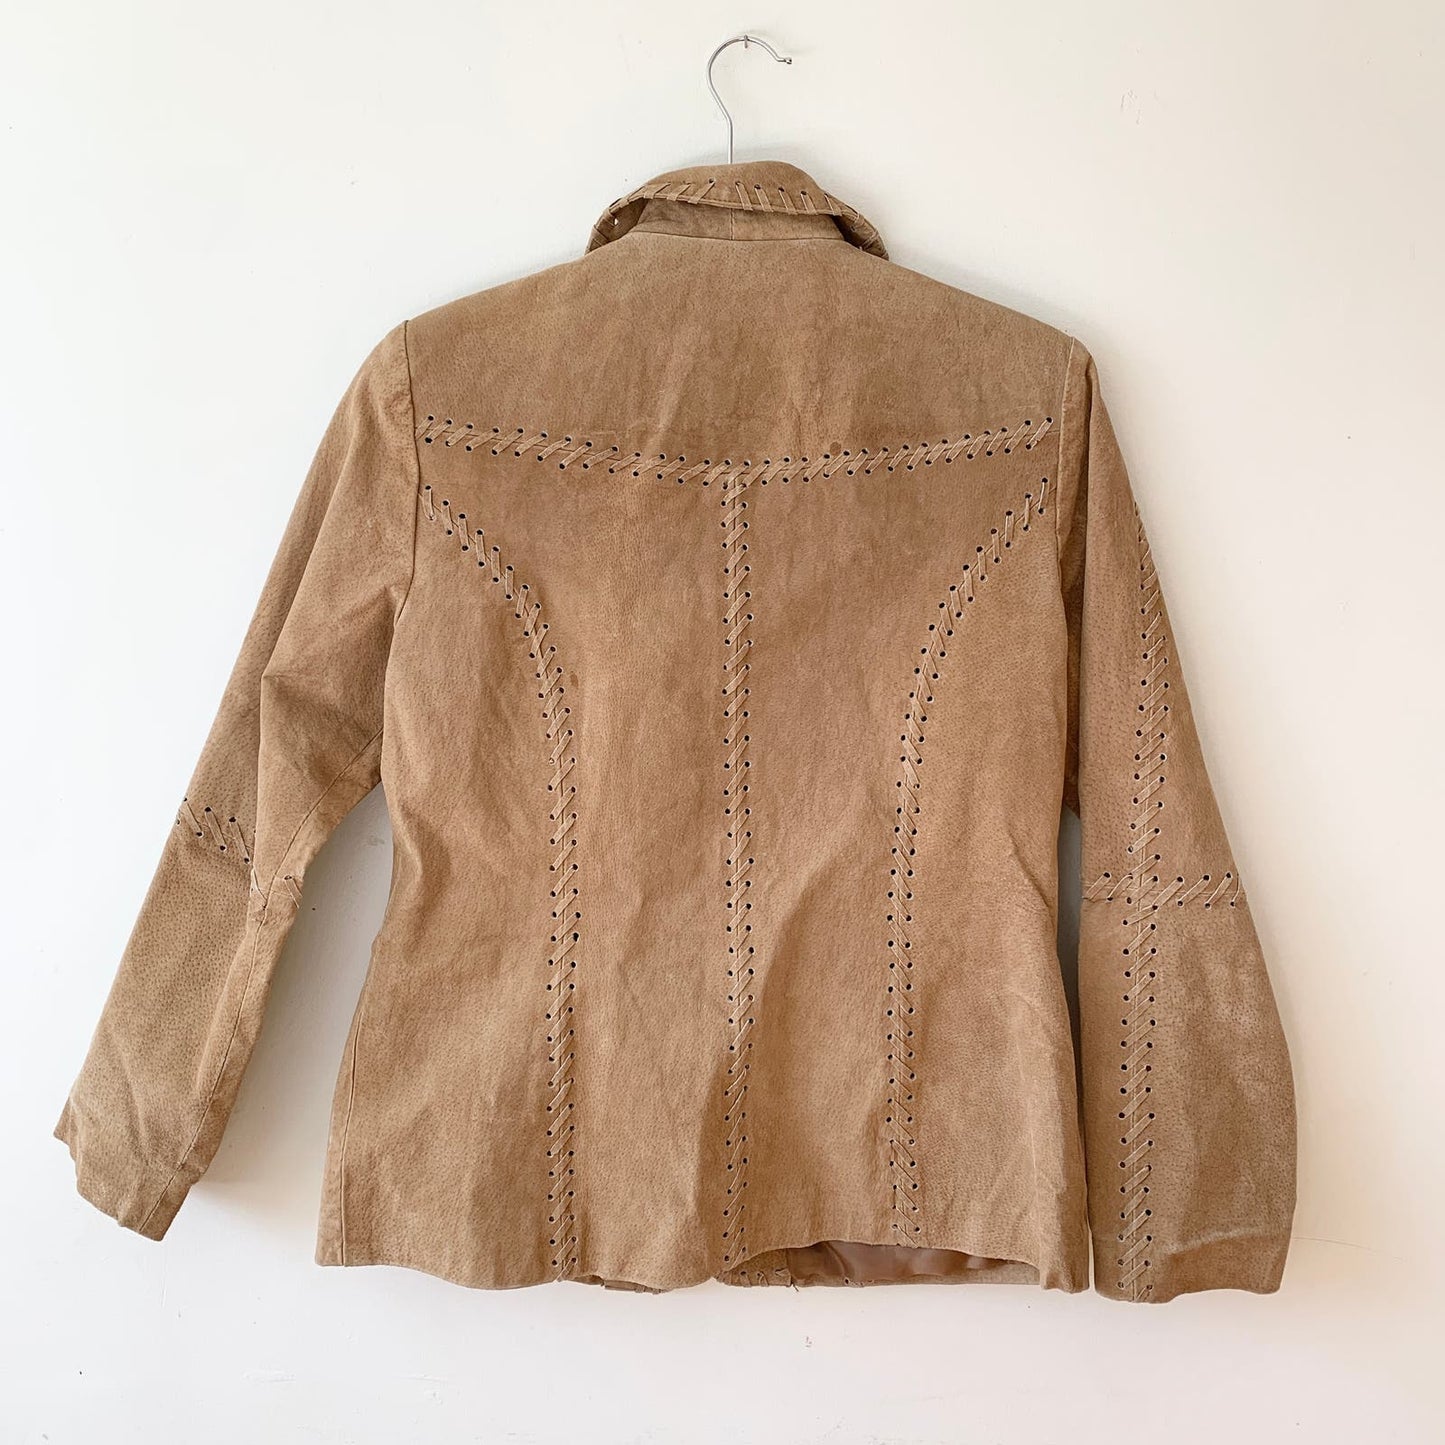 RUE 21 Tan Stitched Leather Suede Jacket Medium